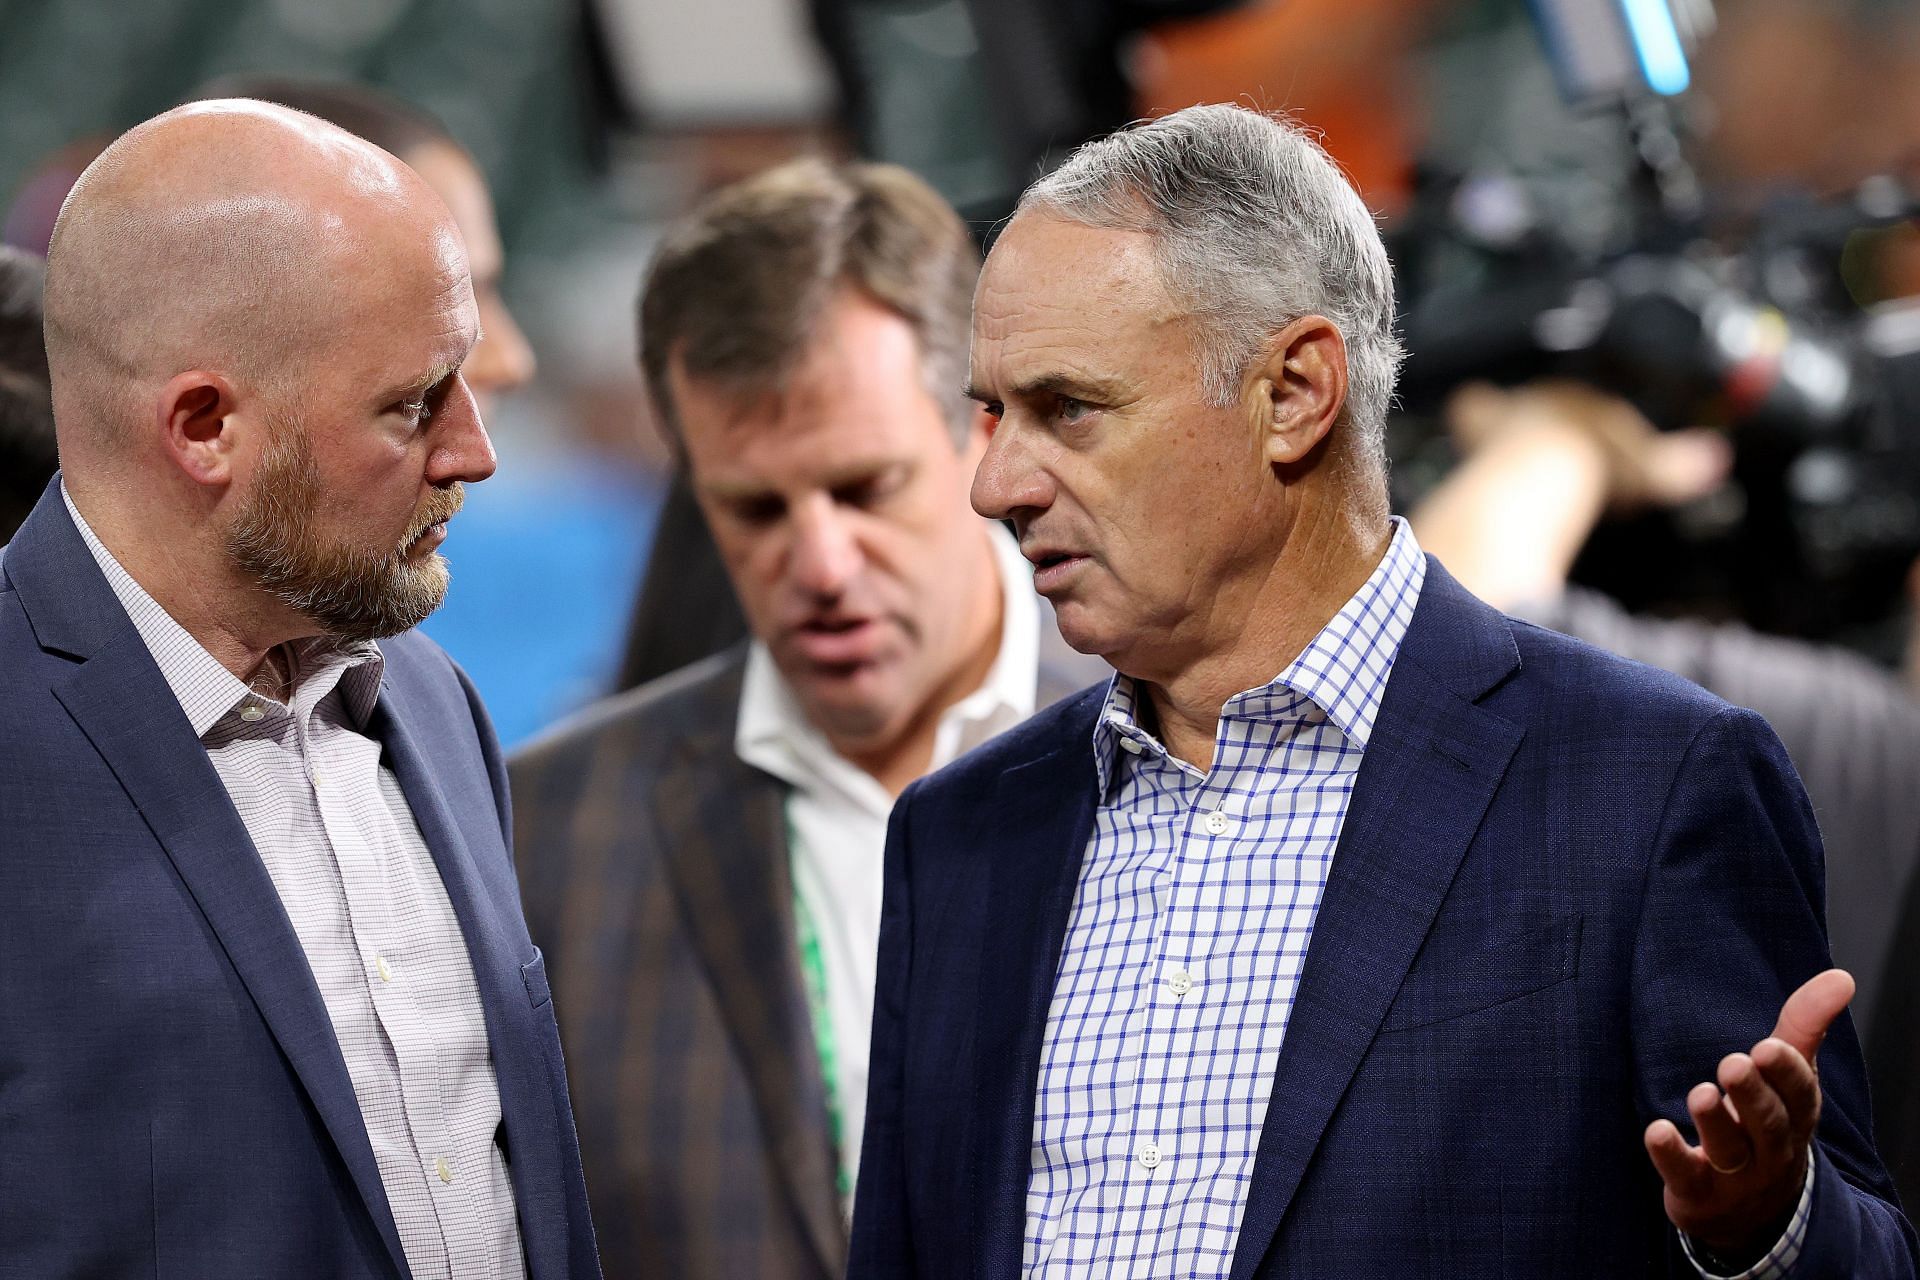 MLB Commissioner Rob Manfred (R) talks with General manager James Click (L) of the Houston Astros.